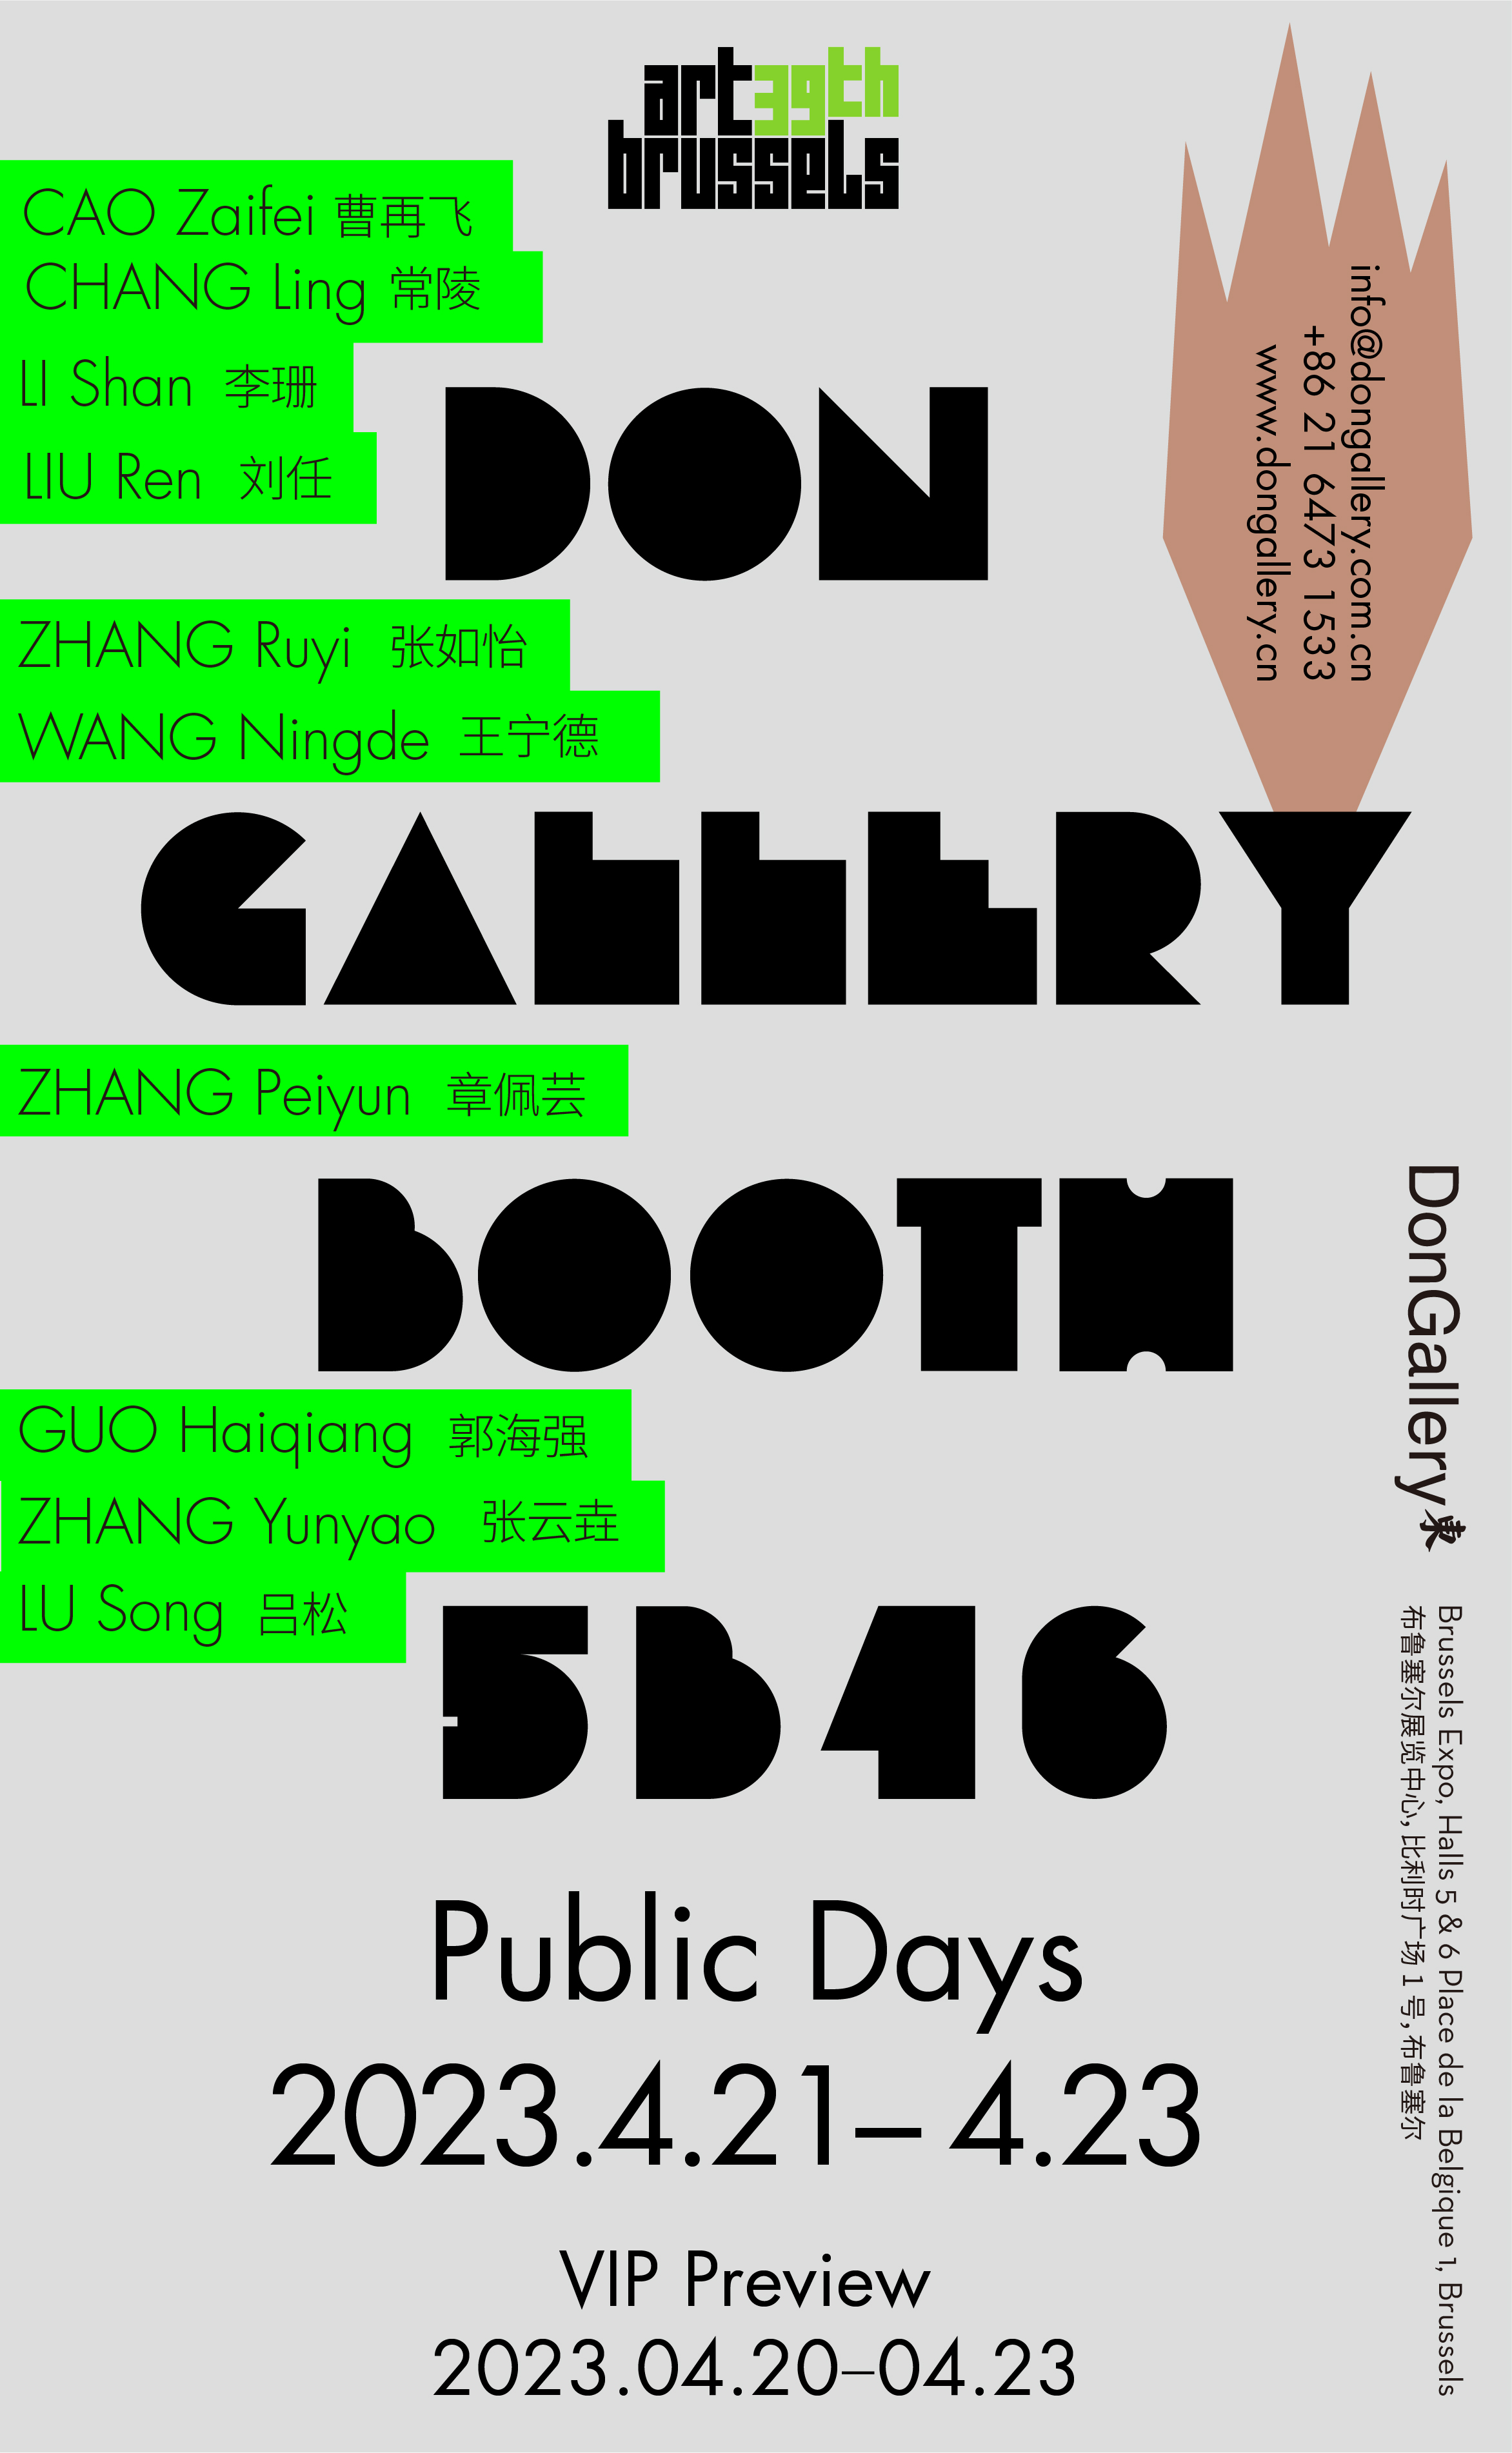 DonGallery-Art Brussels 39th, 2023